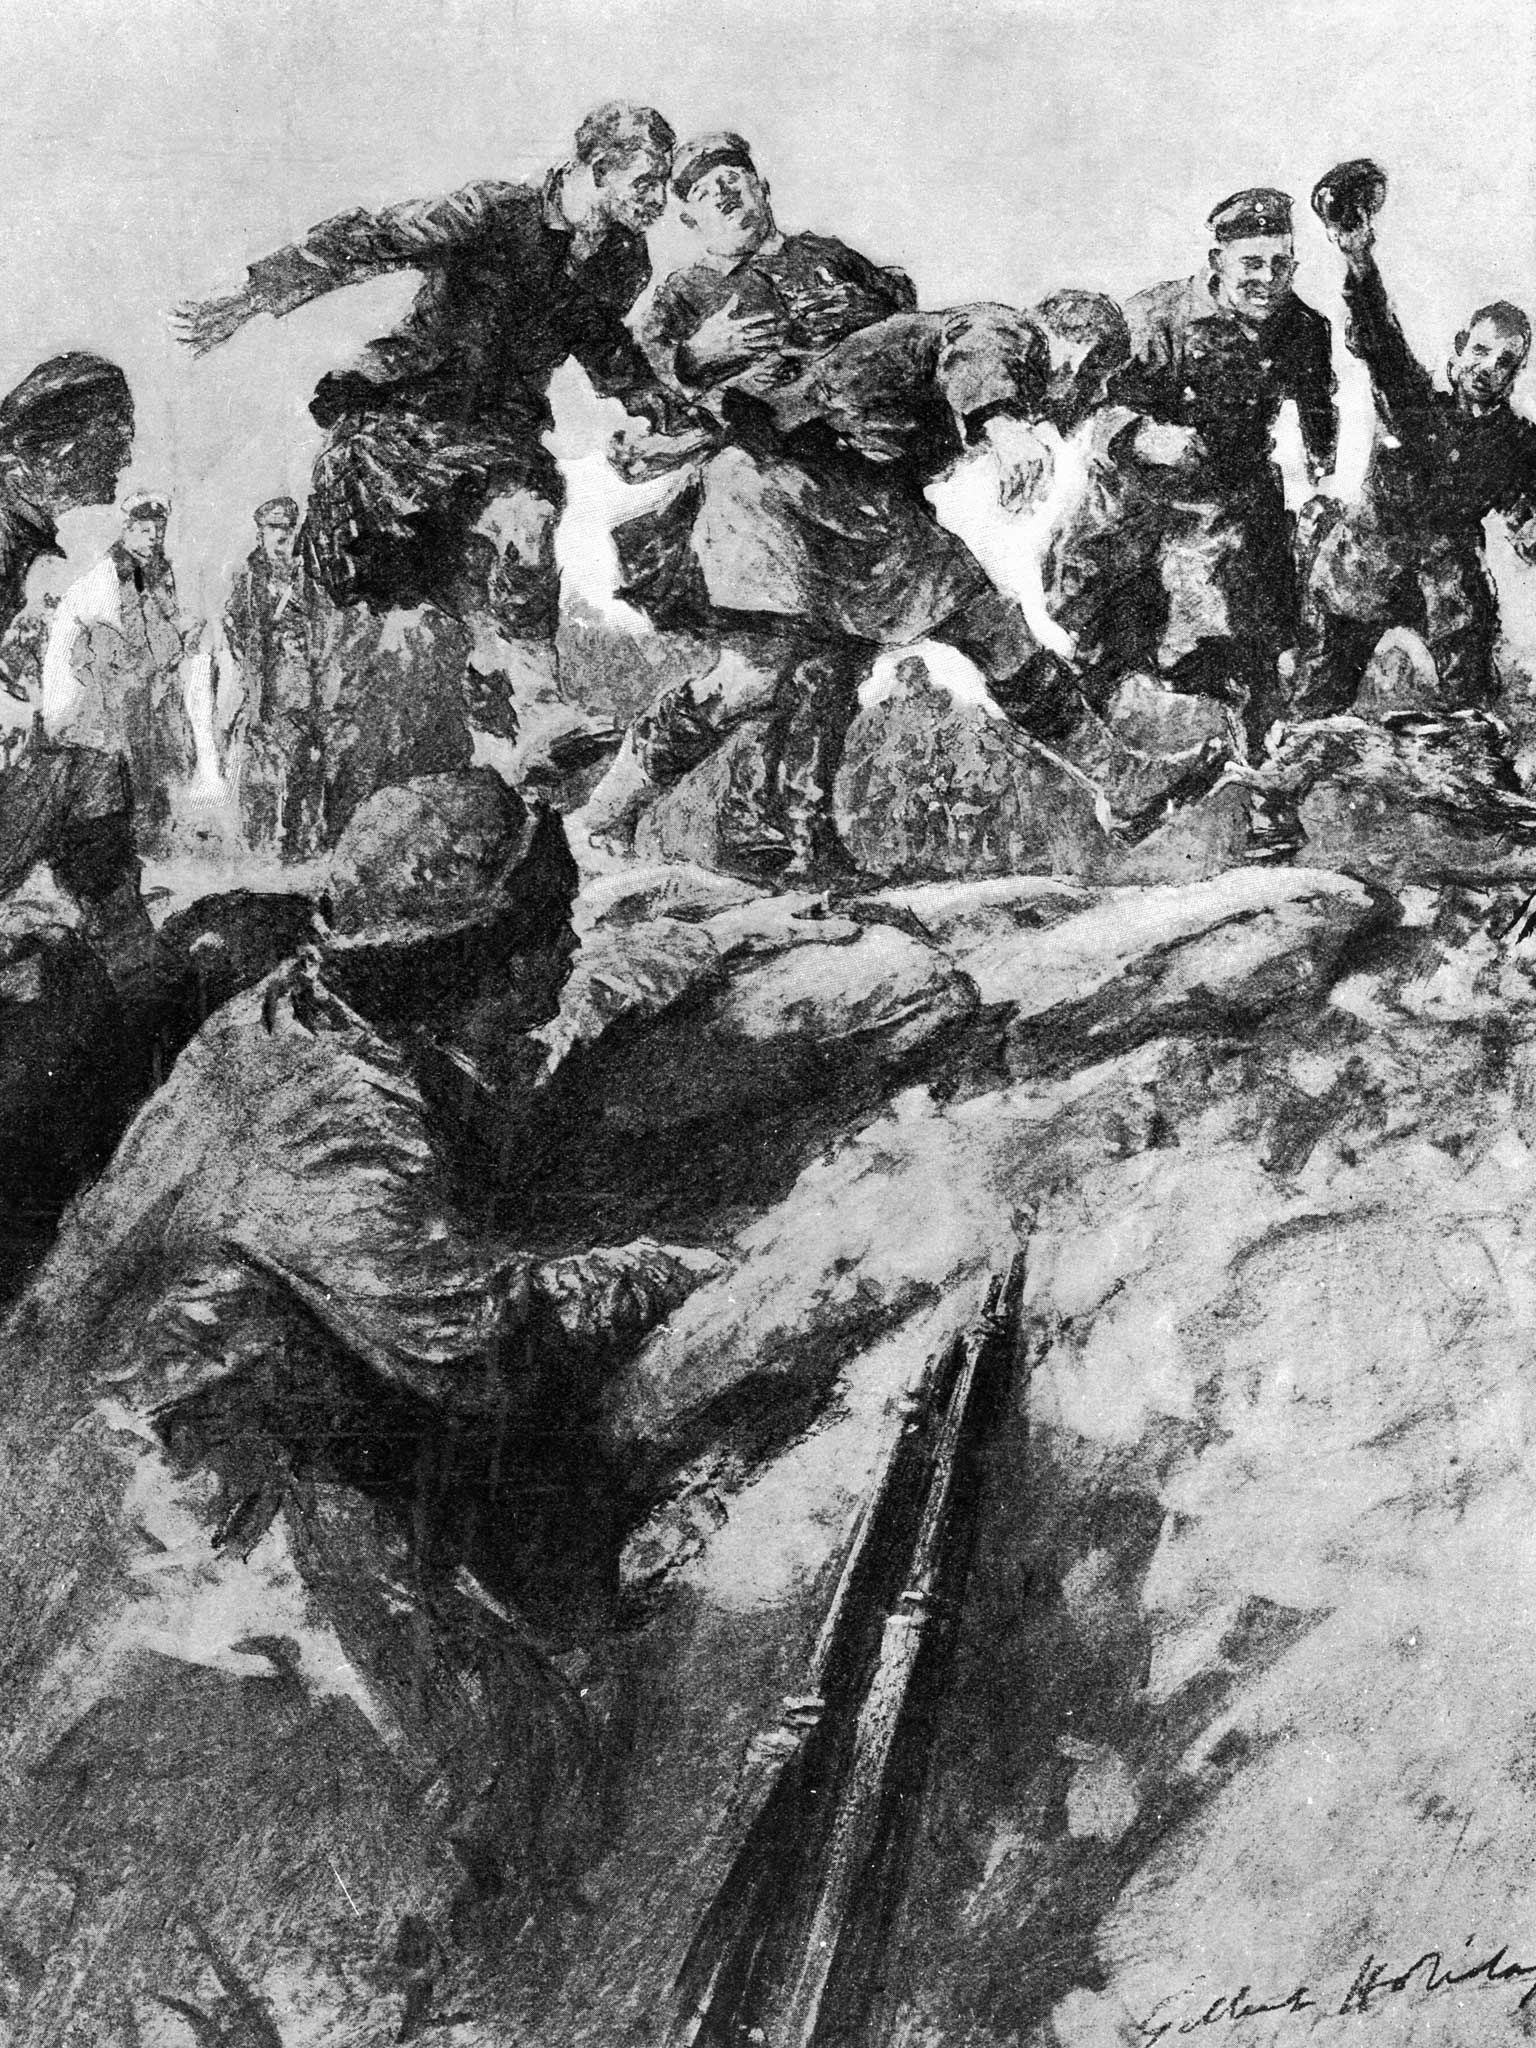 Detail of 'Christmas Truce in the Trenches : Friend and Foe Join in a Hare Hunt' by Gilbert Holliday, drawn from a description by an eye witness rifleman